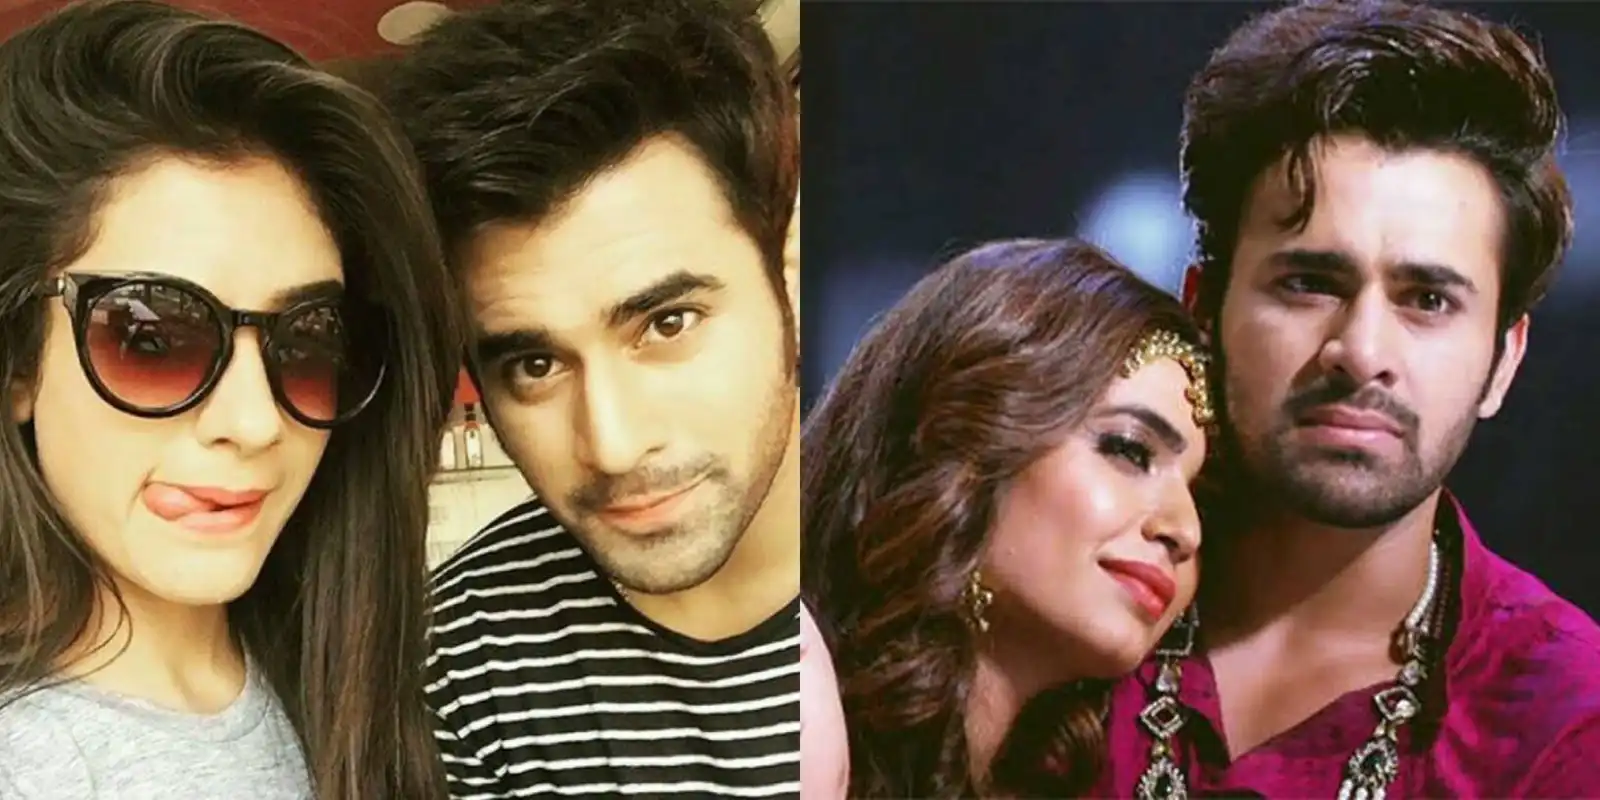 3 Women Naagin 3 Actor Pearl V. Puri Has Been Linked With!